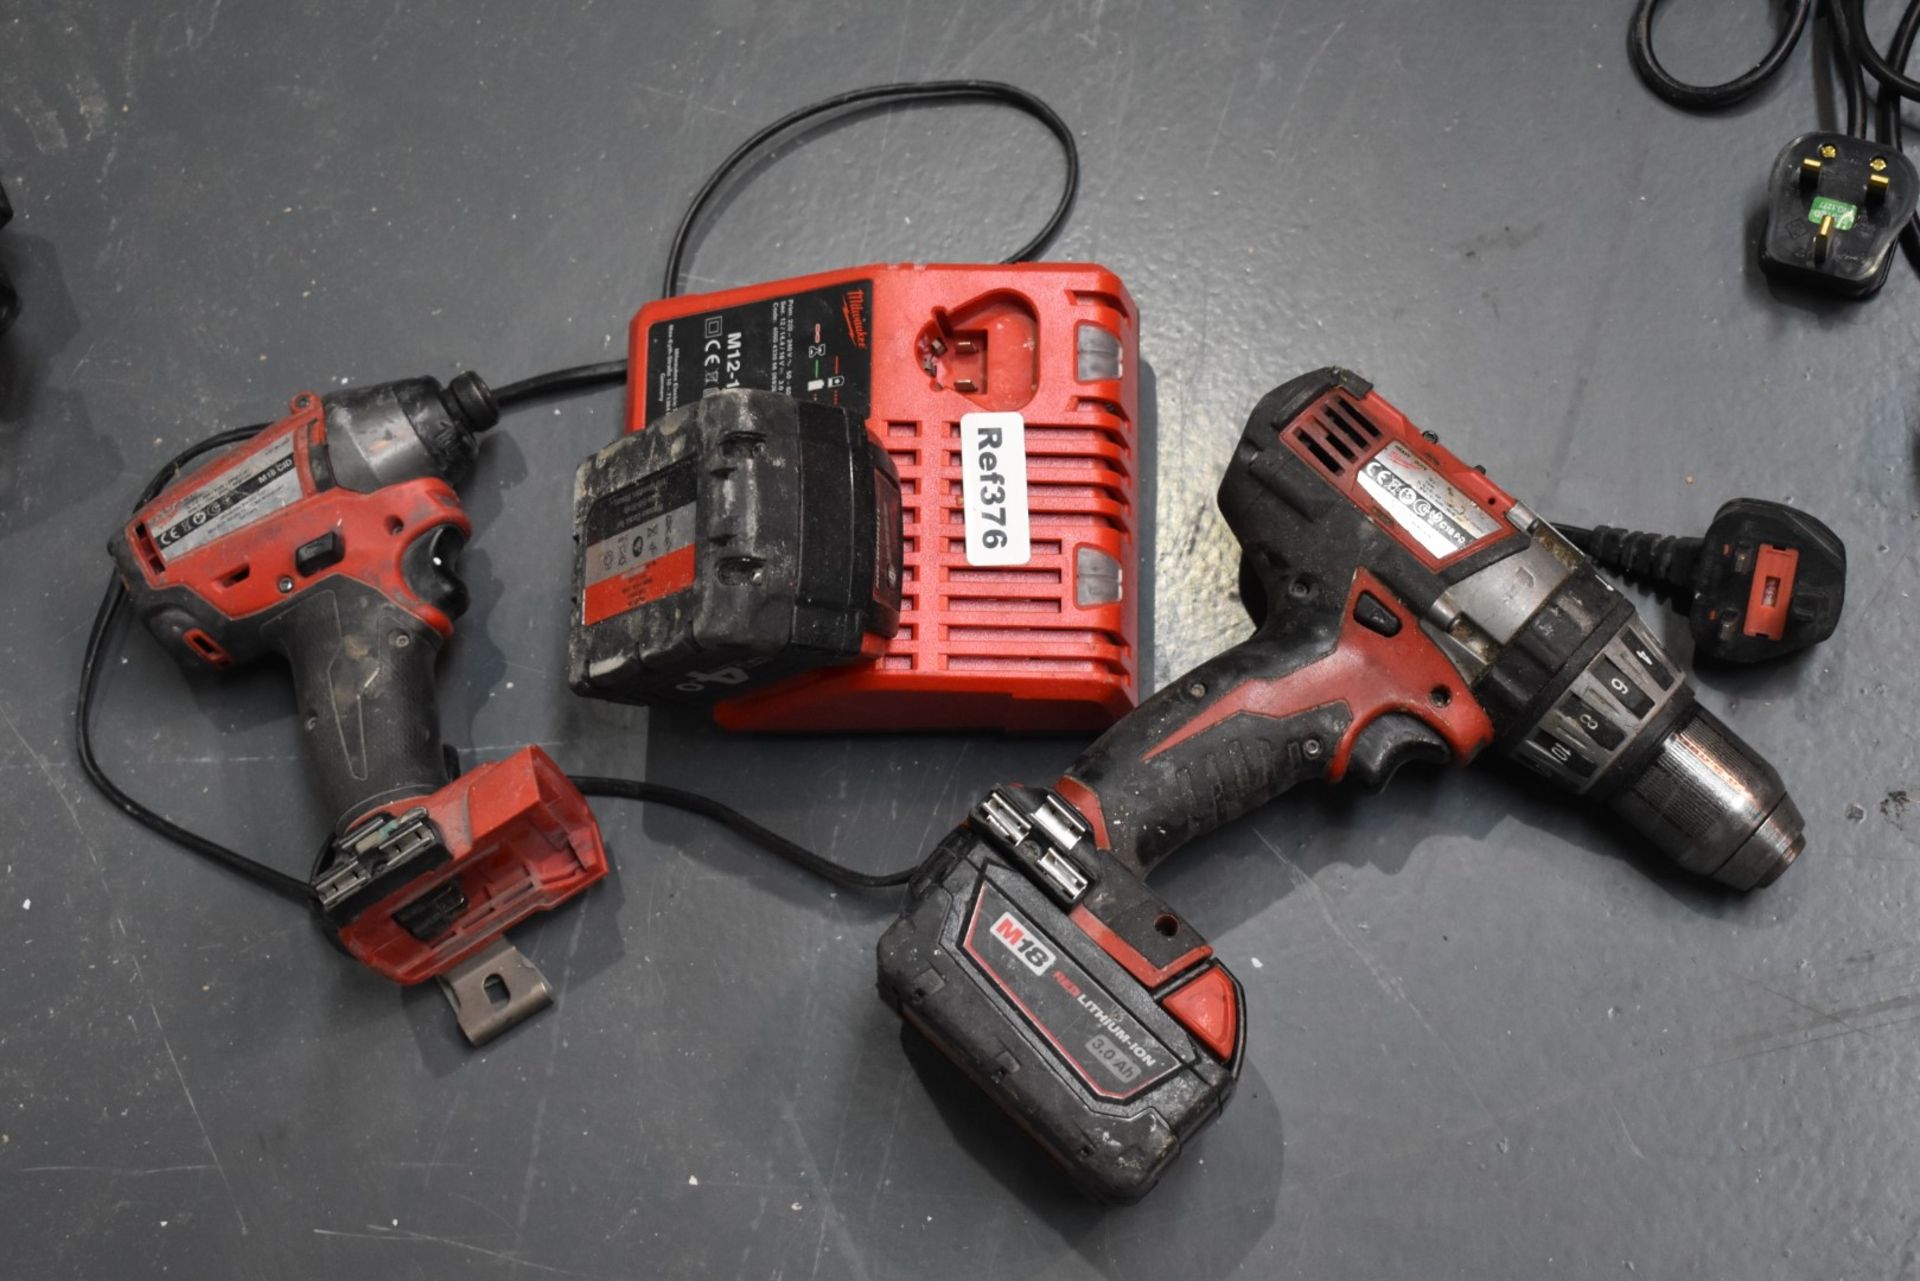 1 x Milwaukee Cordless Heavy Duty Drill Set - Includes 2 x Drills, 2 x Batteries and 1 x Charger - - Bild 2 aus 7